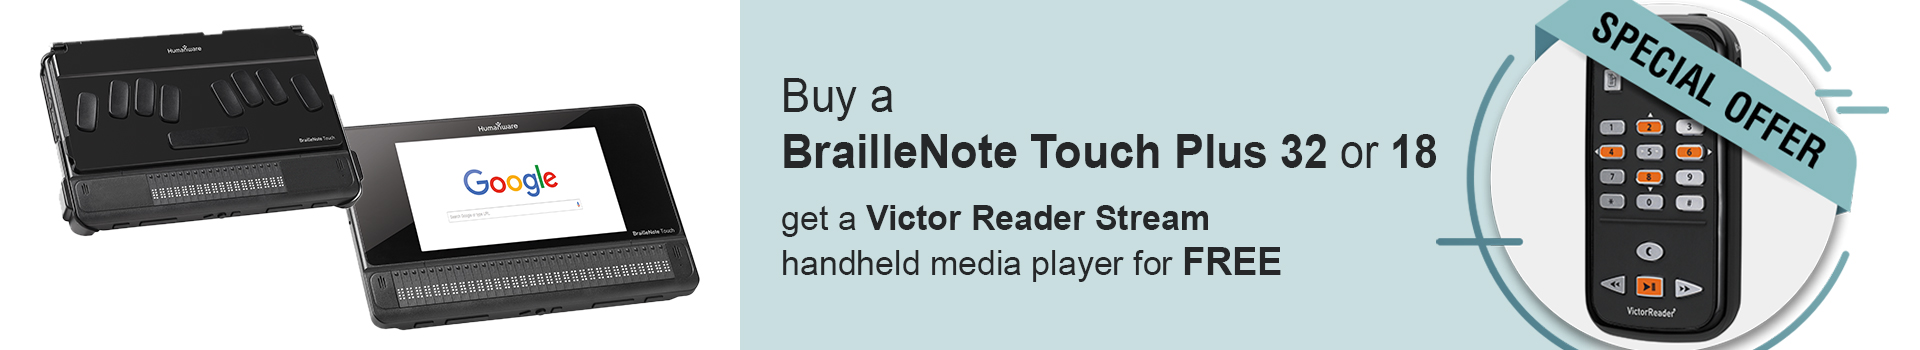 Buy a BrailleNote Touch Plus Get a Stream 2 for Free